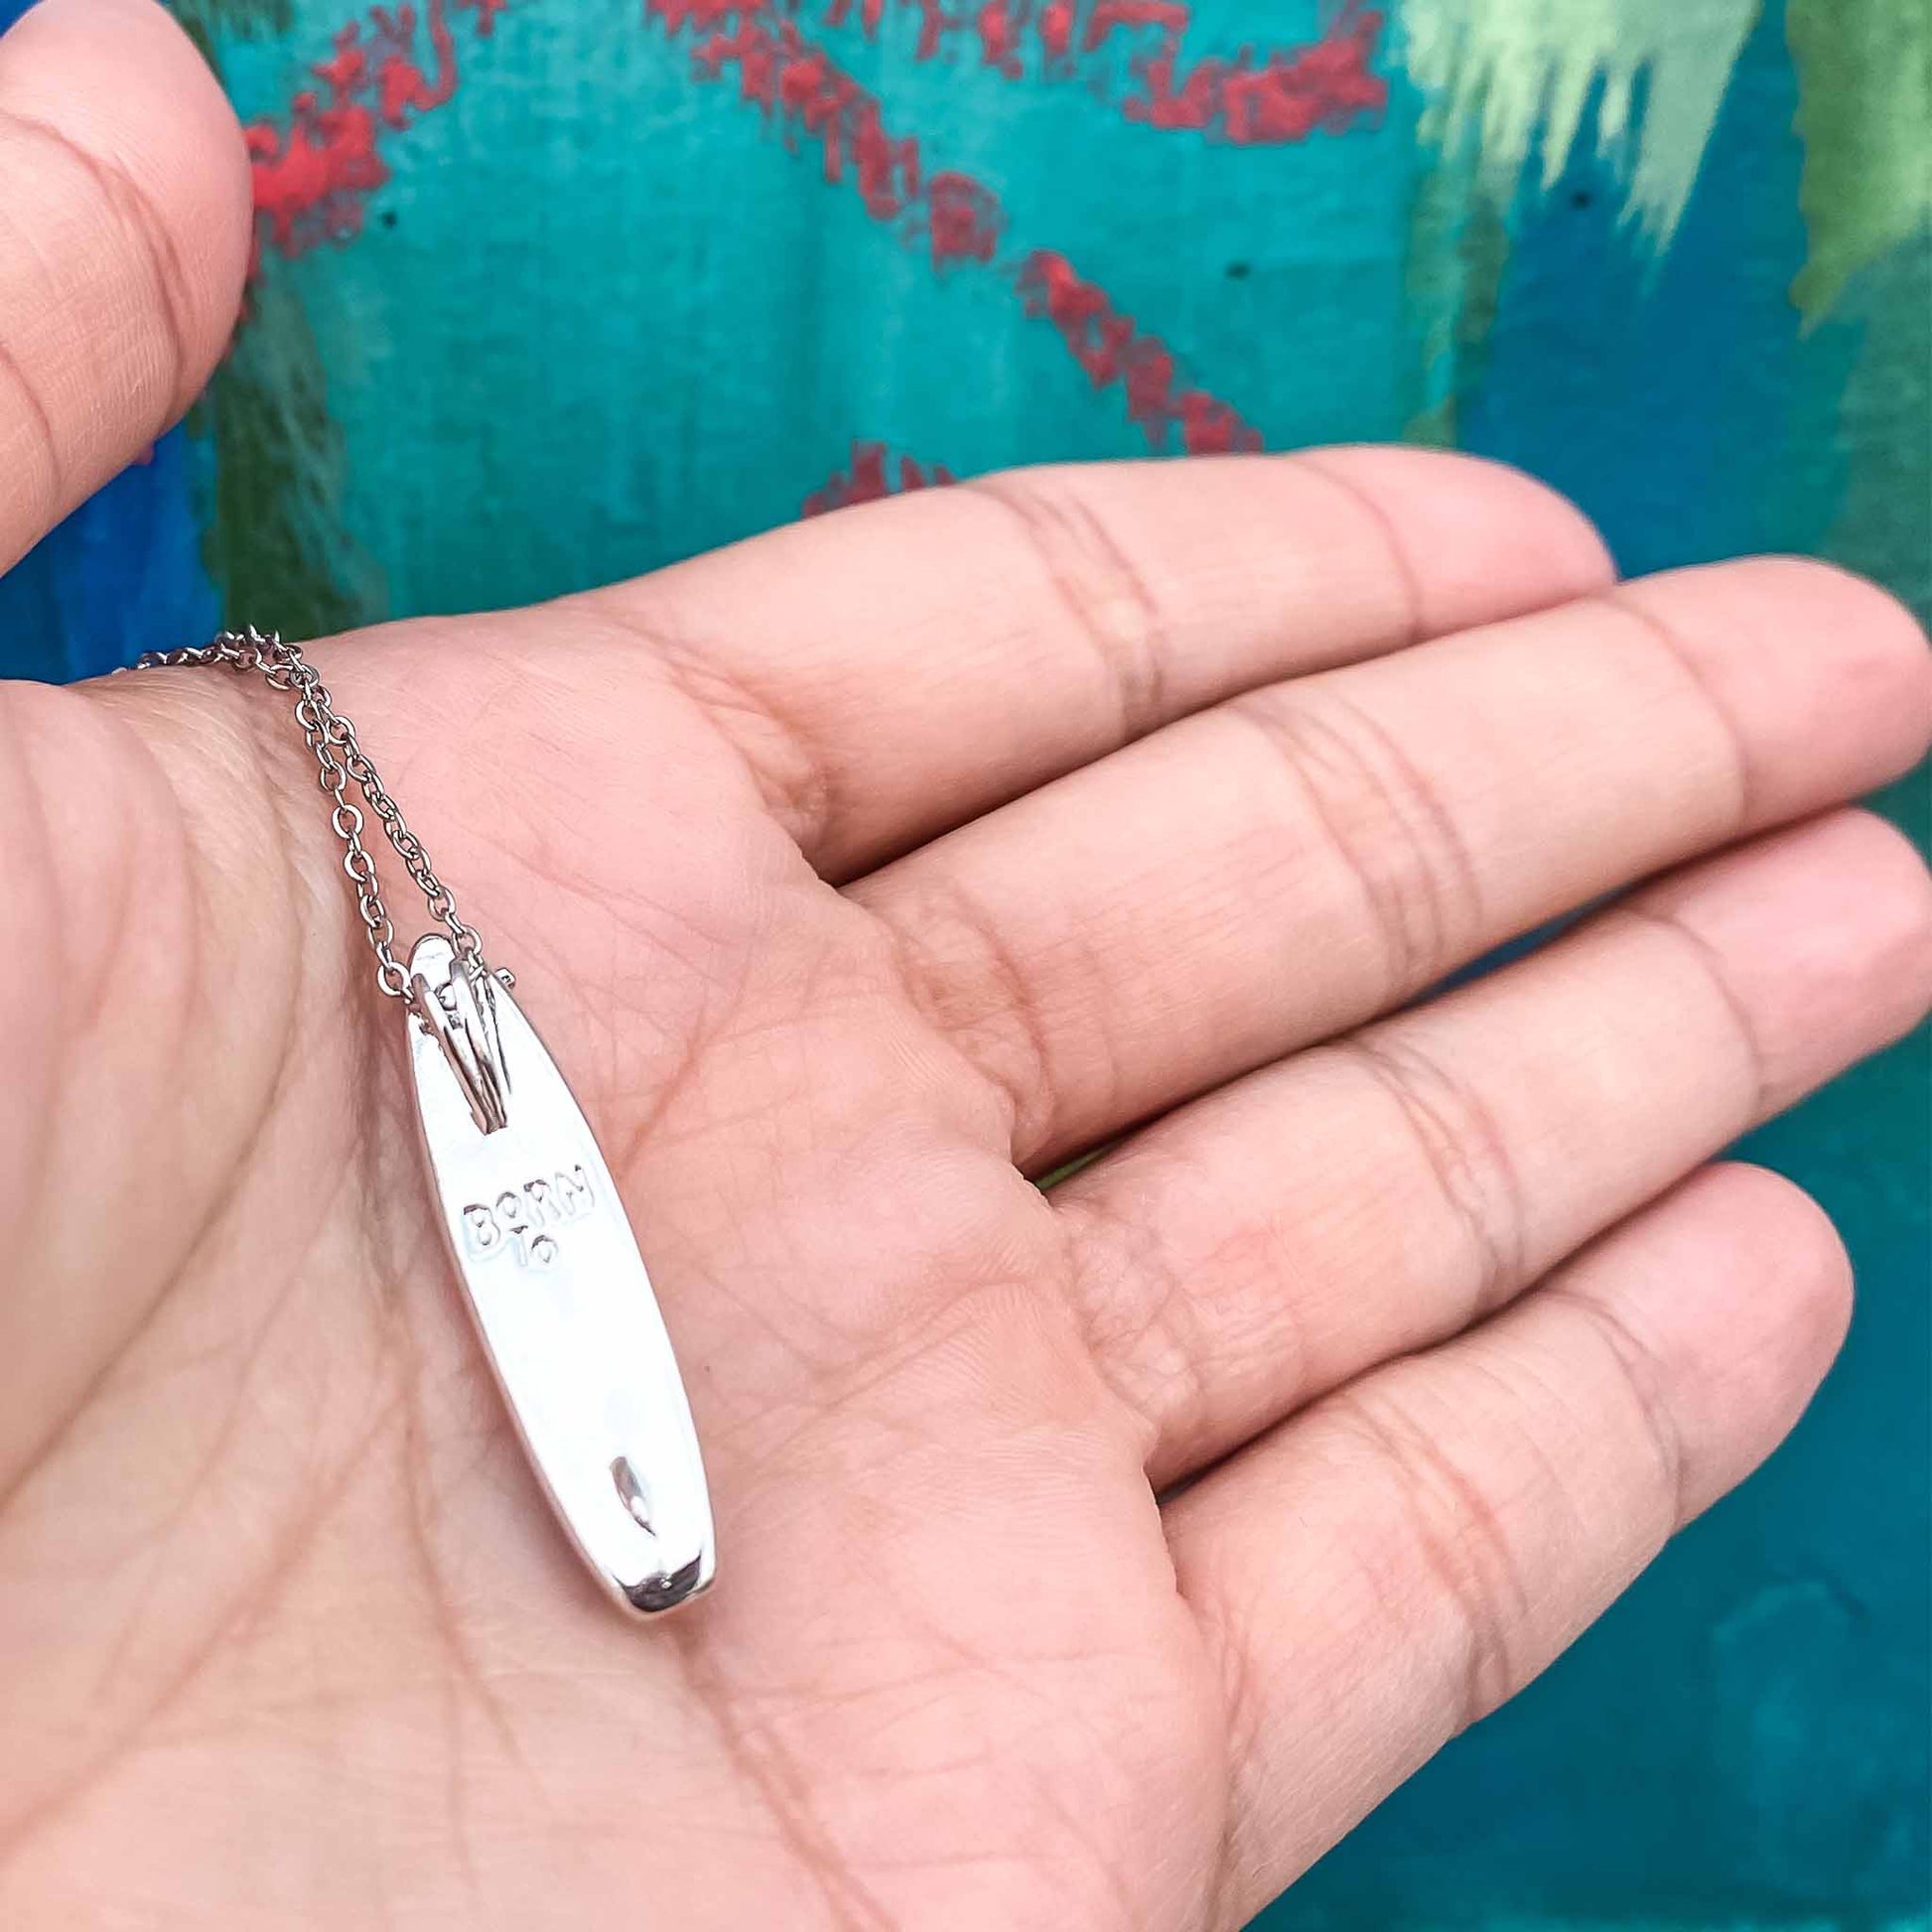 Looking for places to buy or rent a paddle board? This stand up paddle board pendant will be the best and highest performance SUP you'll ever find. Take your paddle board with you, even when you're not surfing, racing or touring. Shop September's birthstone SUP jewelry online or at a surf shop near you